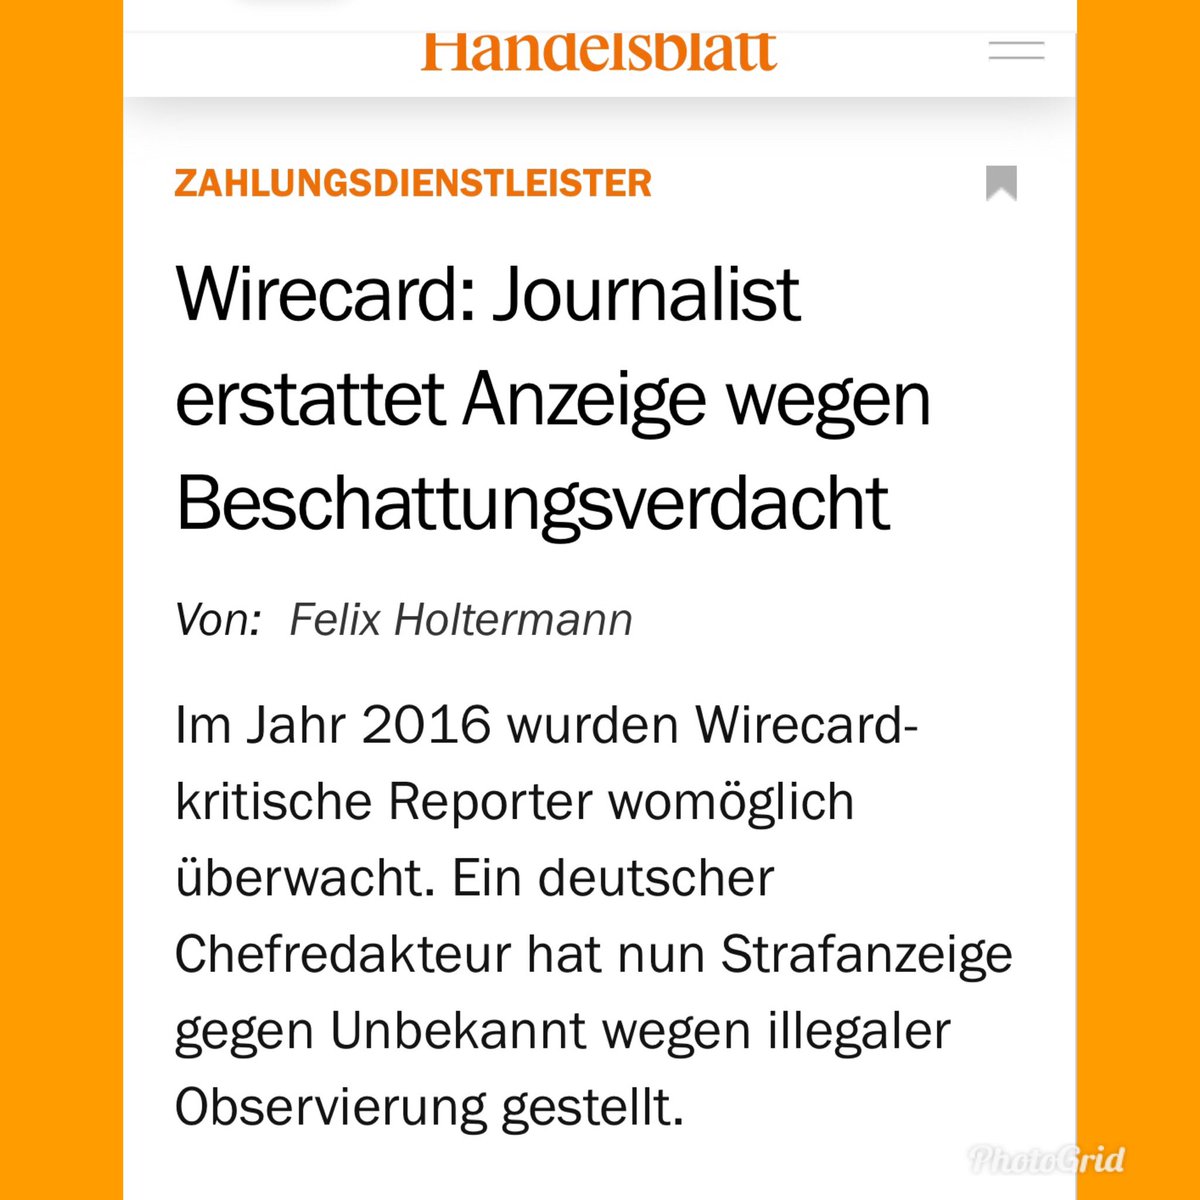 1/6
HOT NEWS👇

GERMAN JOURNALIST Michaël Hedtstück filed criminal charges against unknown after learning that he possibly was a ⚠️TARGET of ILLEGAL SPYING in 2016❗️
(@FT 12.11.19)

An action presumably taken after his «negative» ARTICLES on #Wirecard...🤔🤭

$WDI @derspiegel